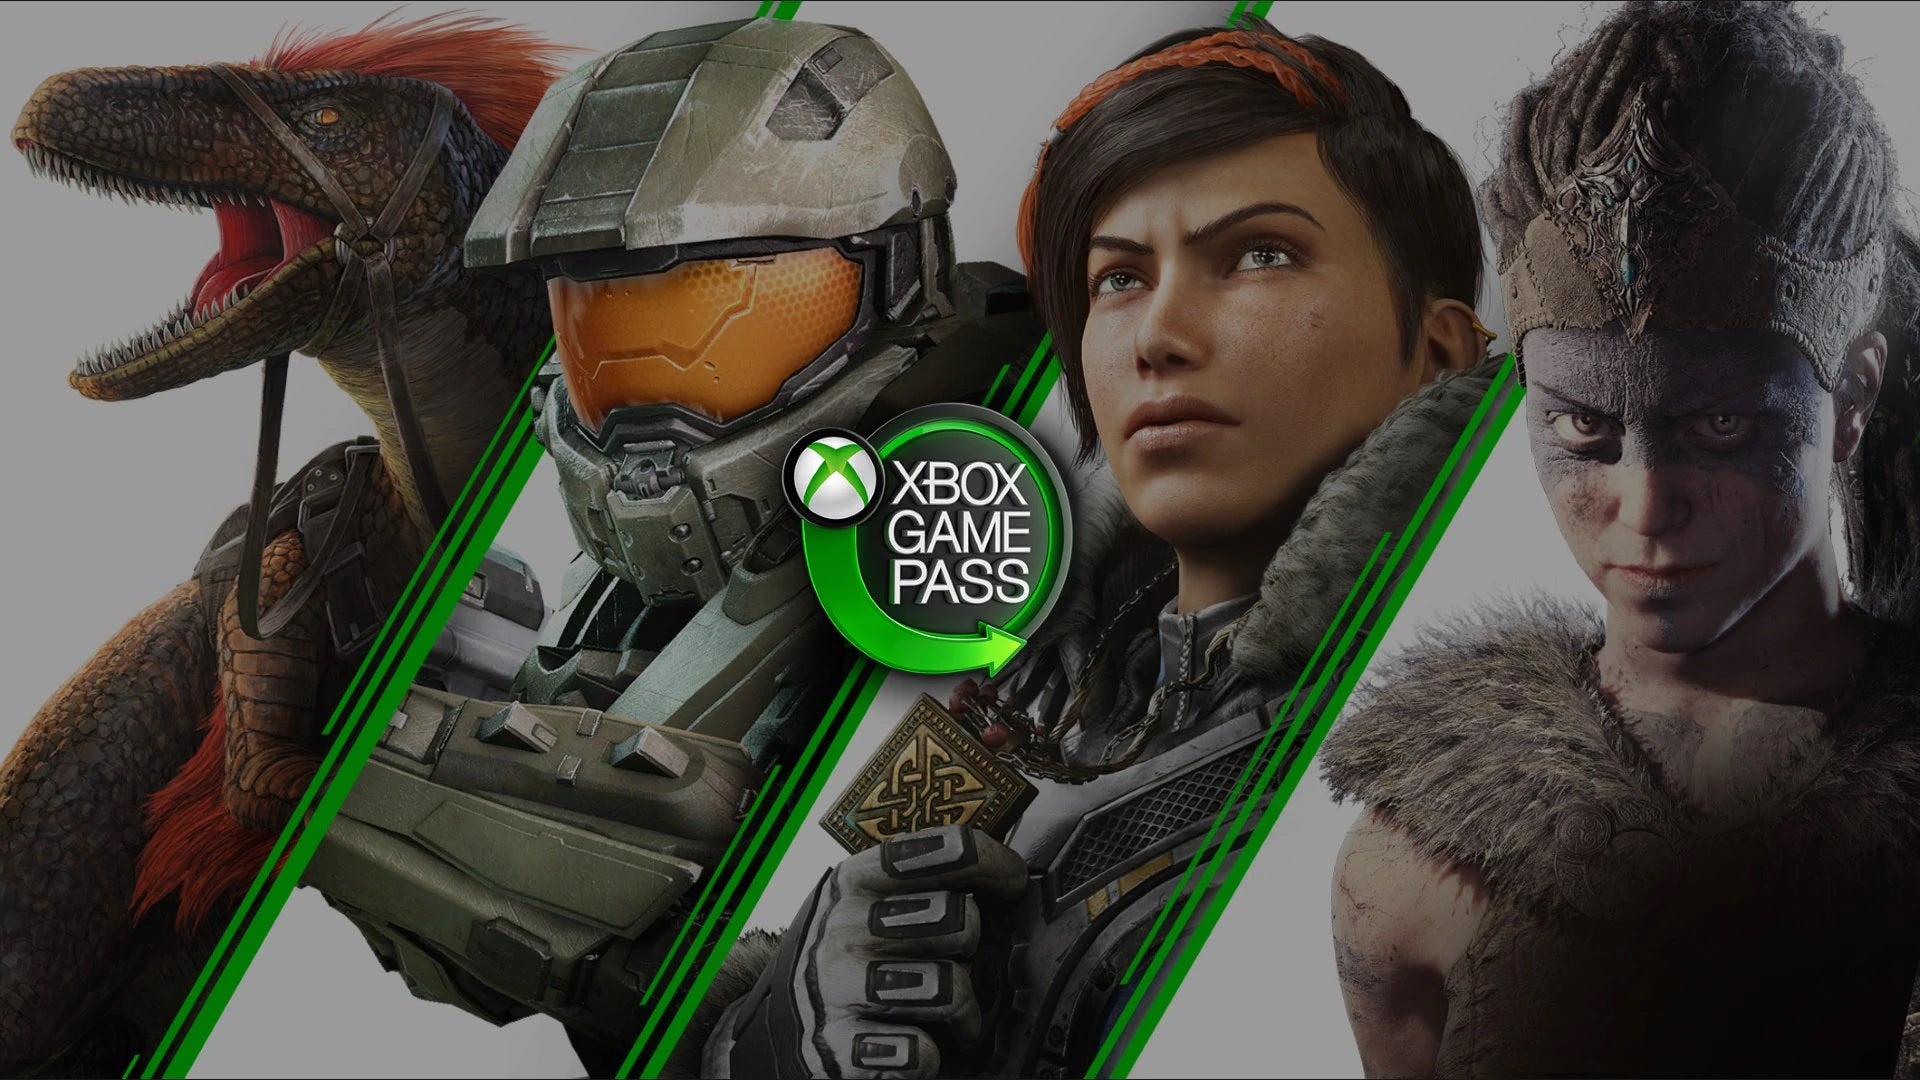 Image for Xbox testing new multiple user Game Pass plan